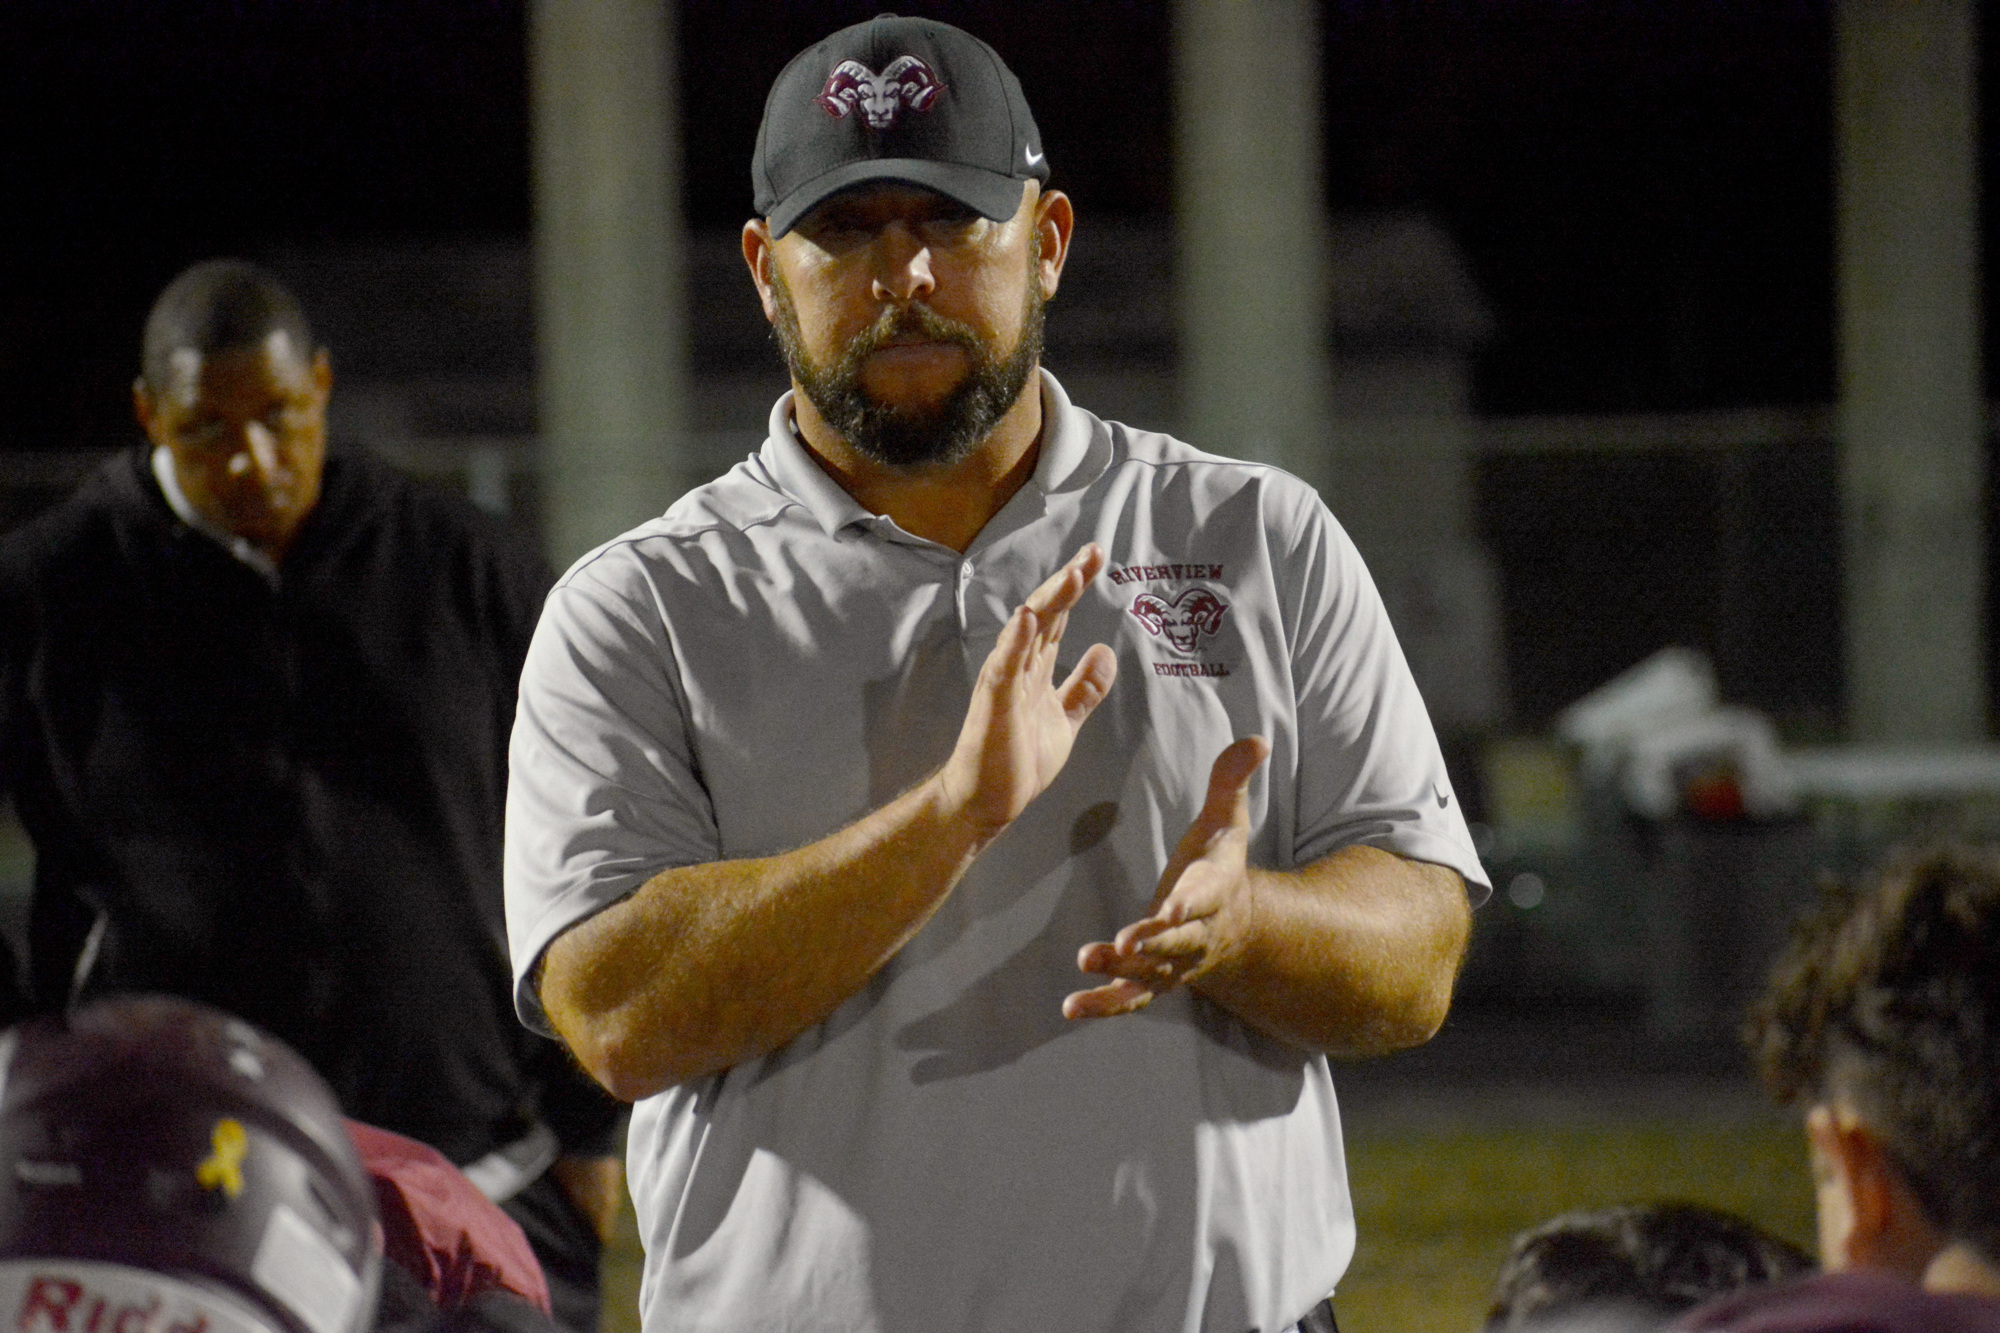 Riverview football coach Josh Smithers said he is not requiring his players to attend summer workouts if they do not feel comfortable.